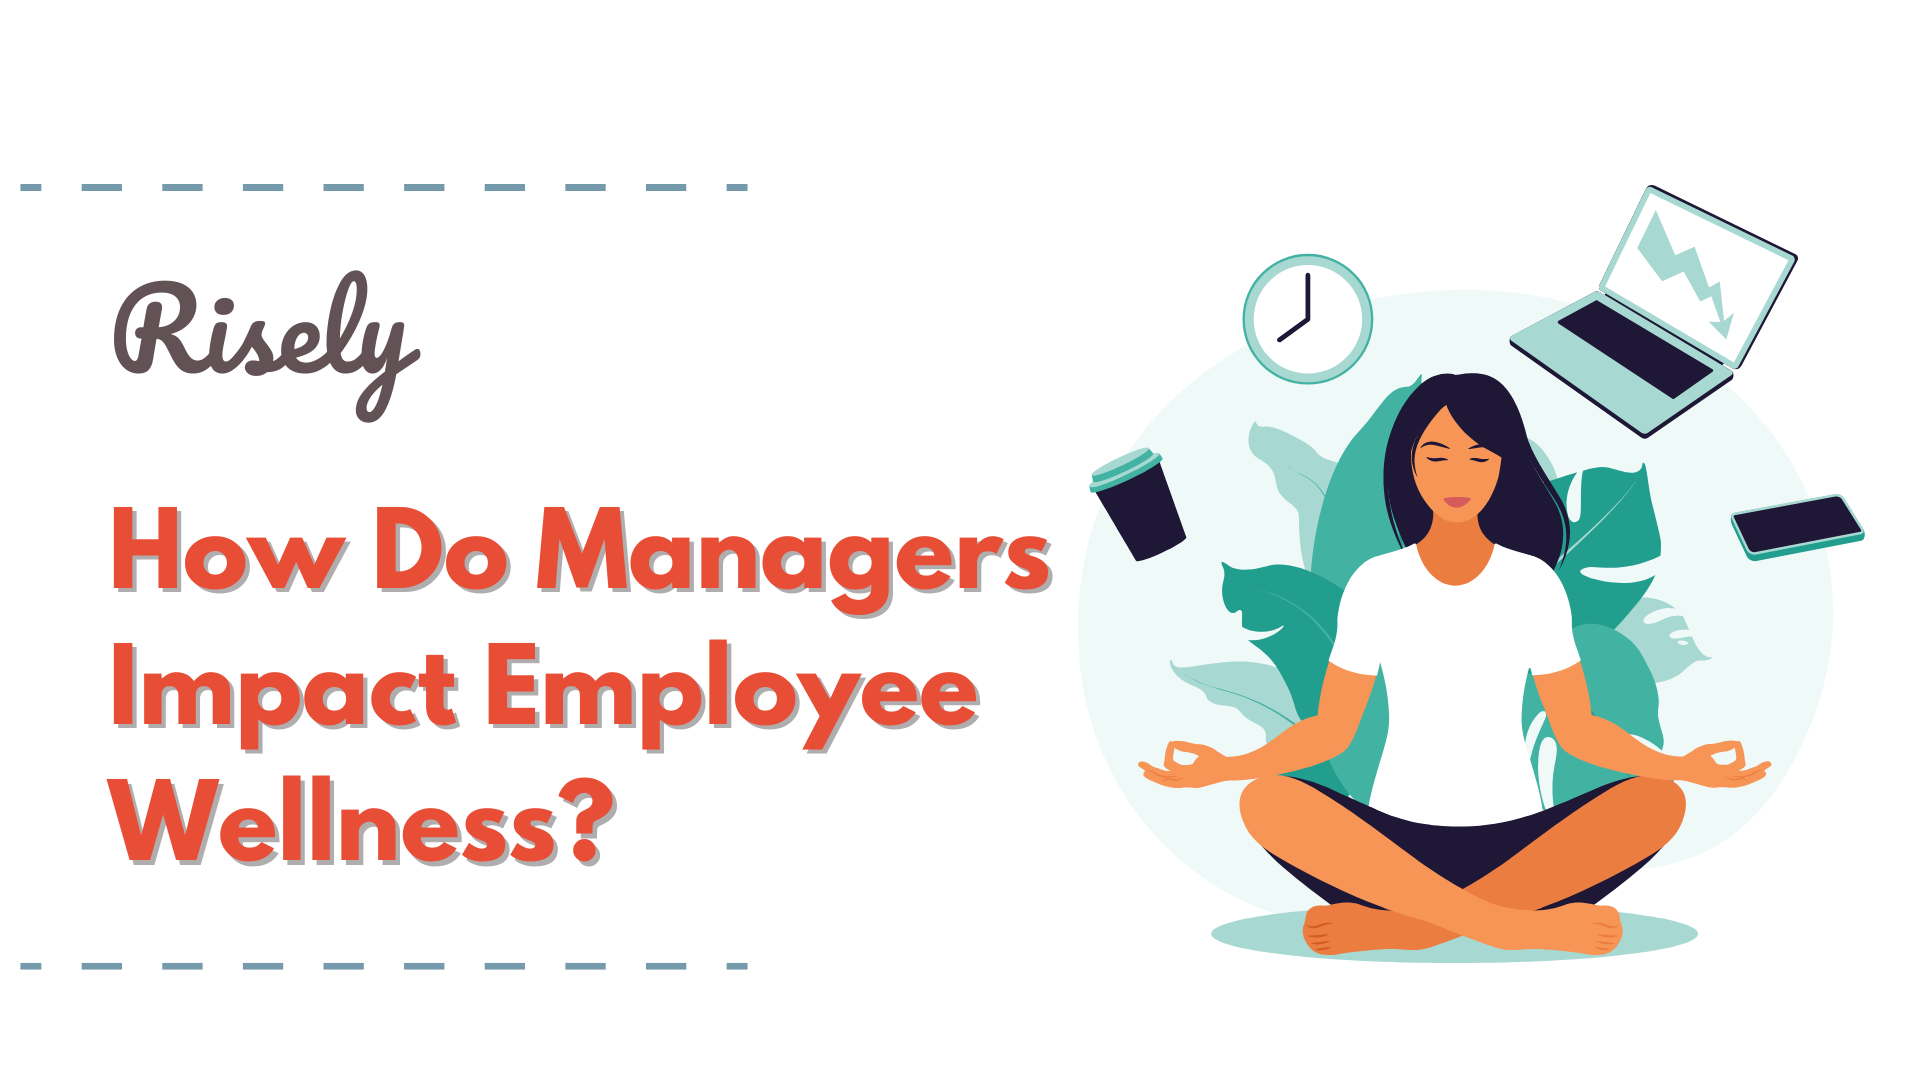 How Do Managers Impact Employee Wellness?